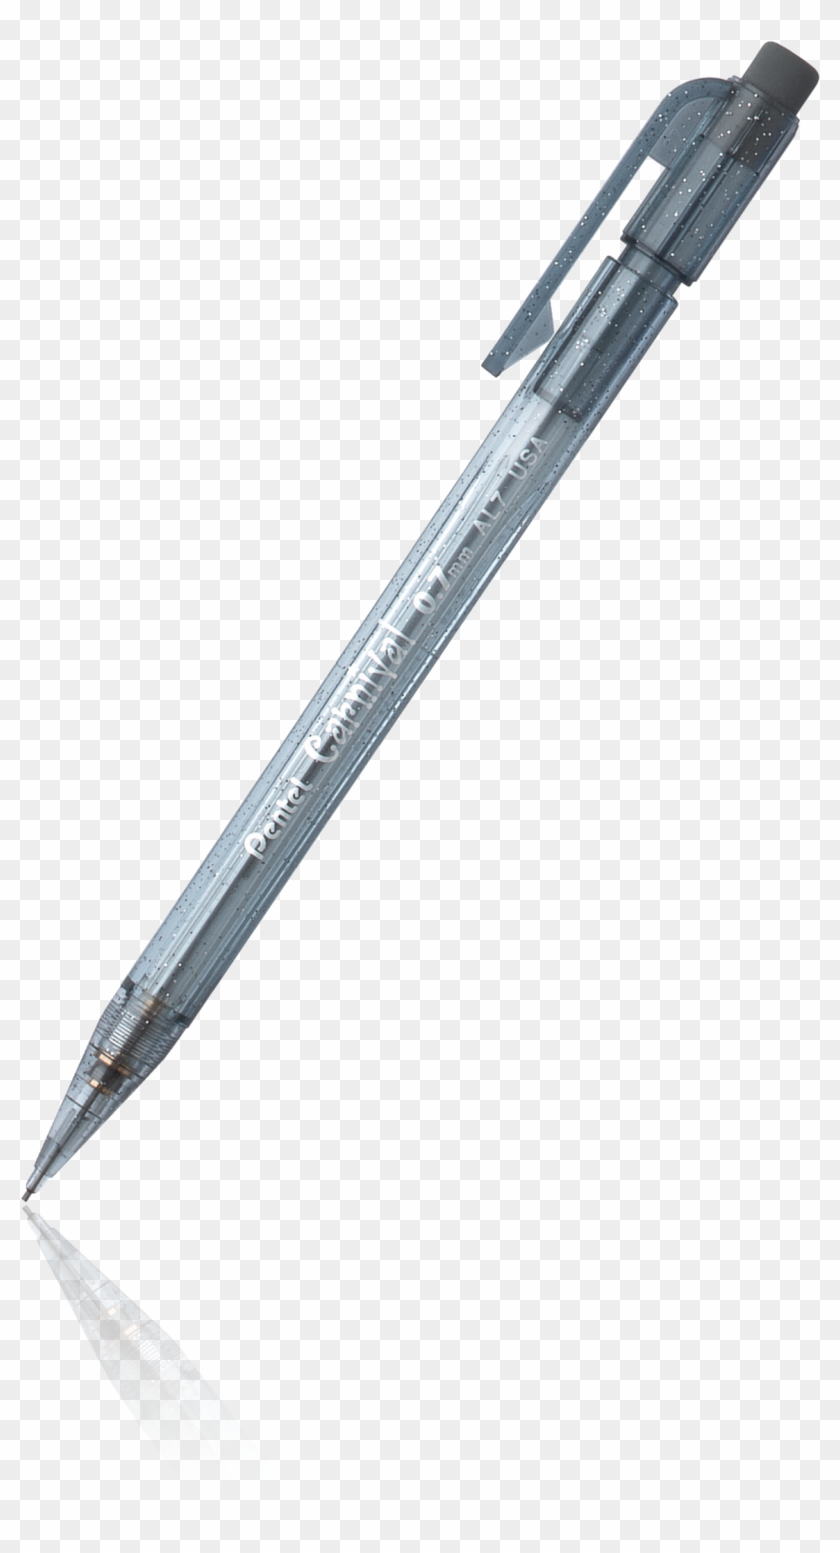 Clip Arts Related To - 1 Mechanical Pencil #416821